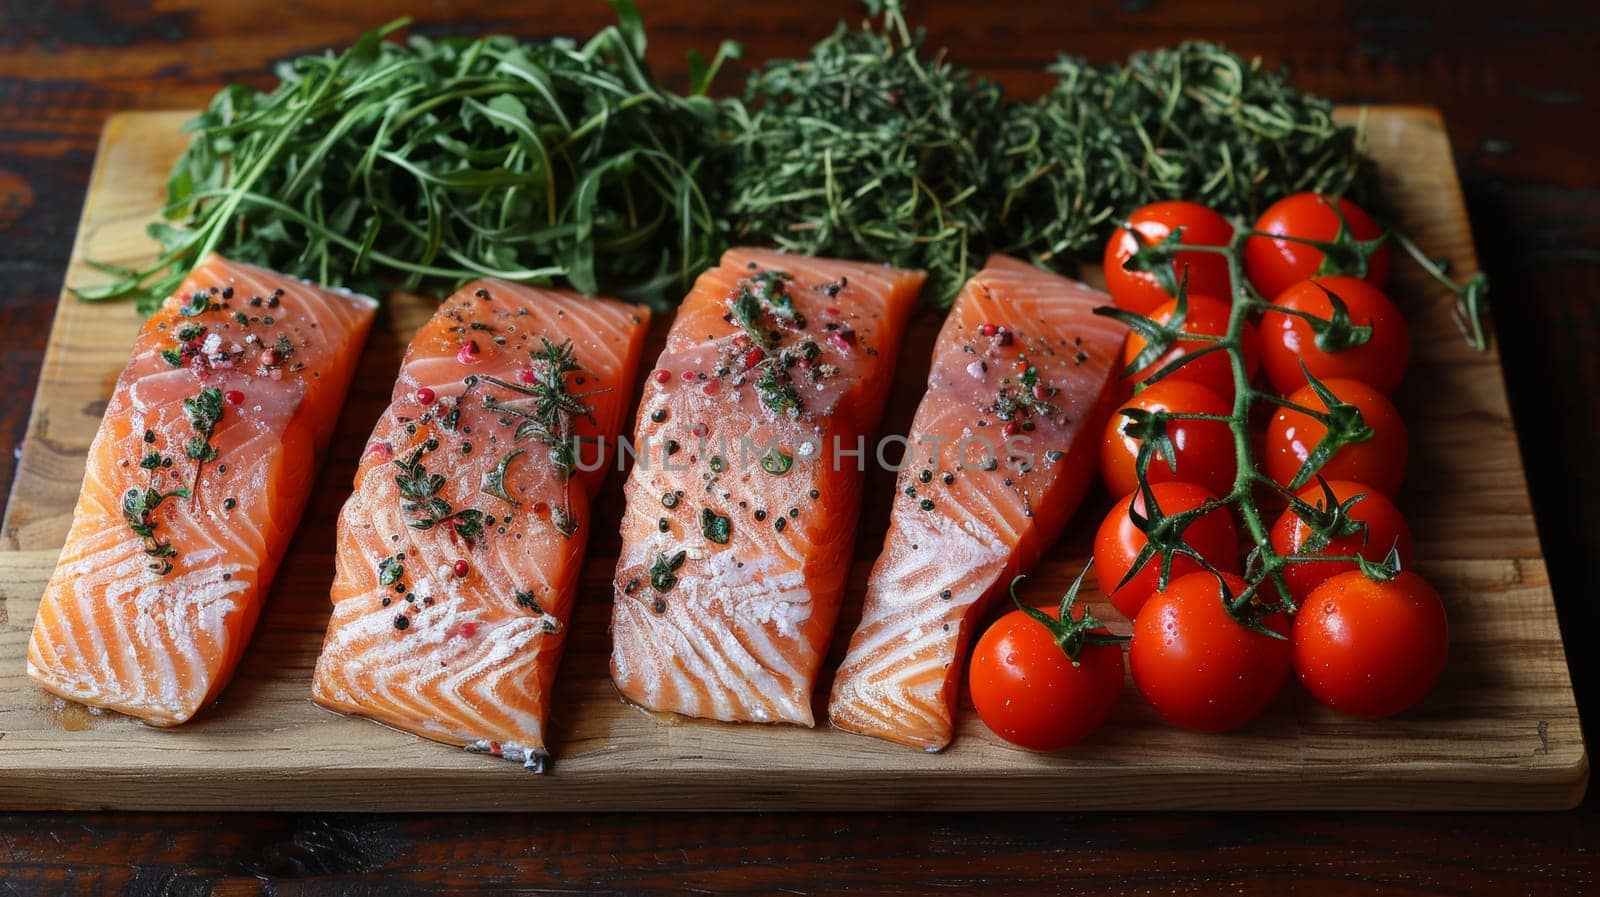 A wooden cutting board with salmon, tomatoes and herbs on it, AI by starush